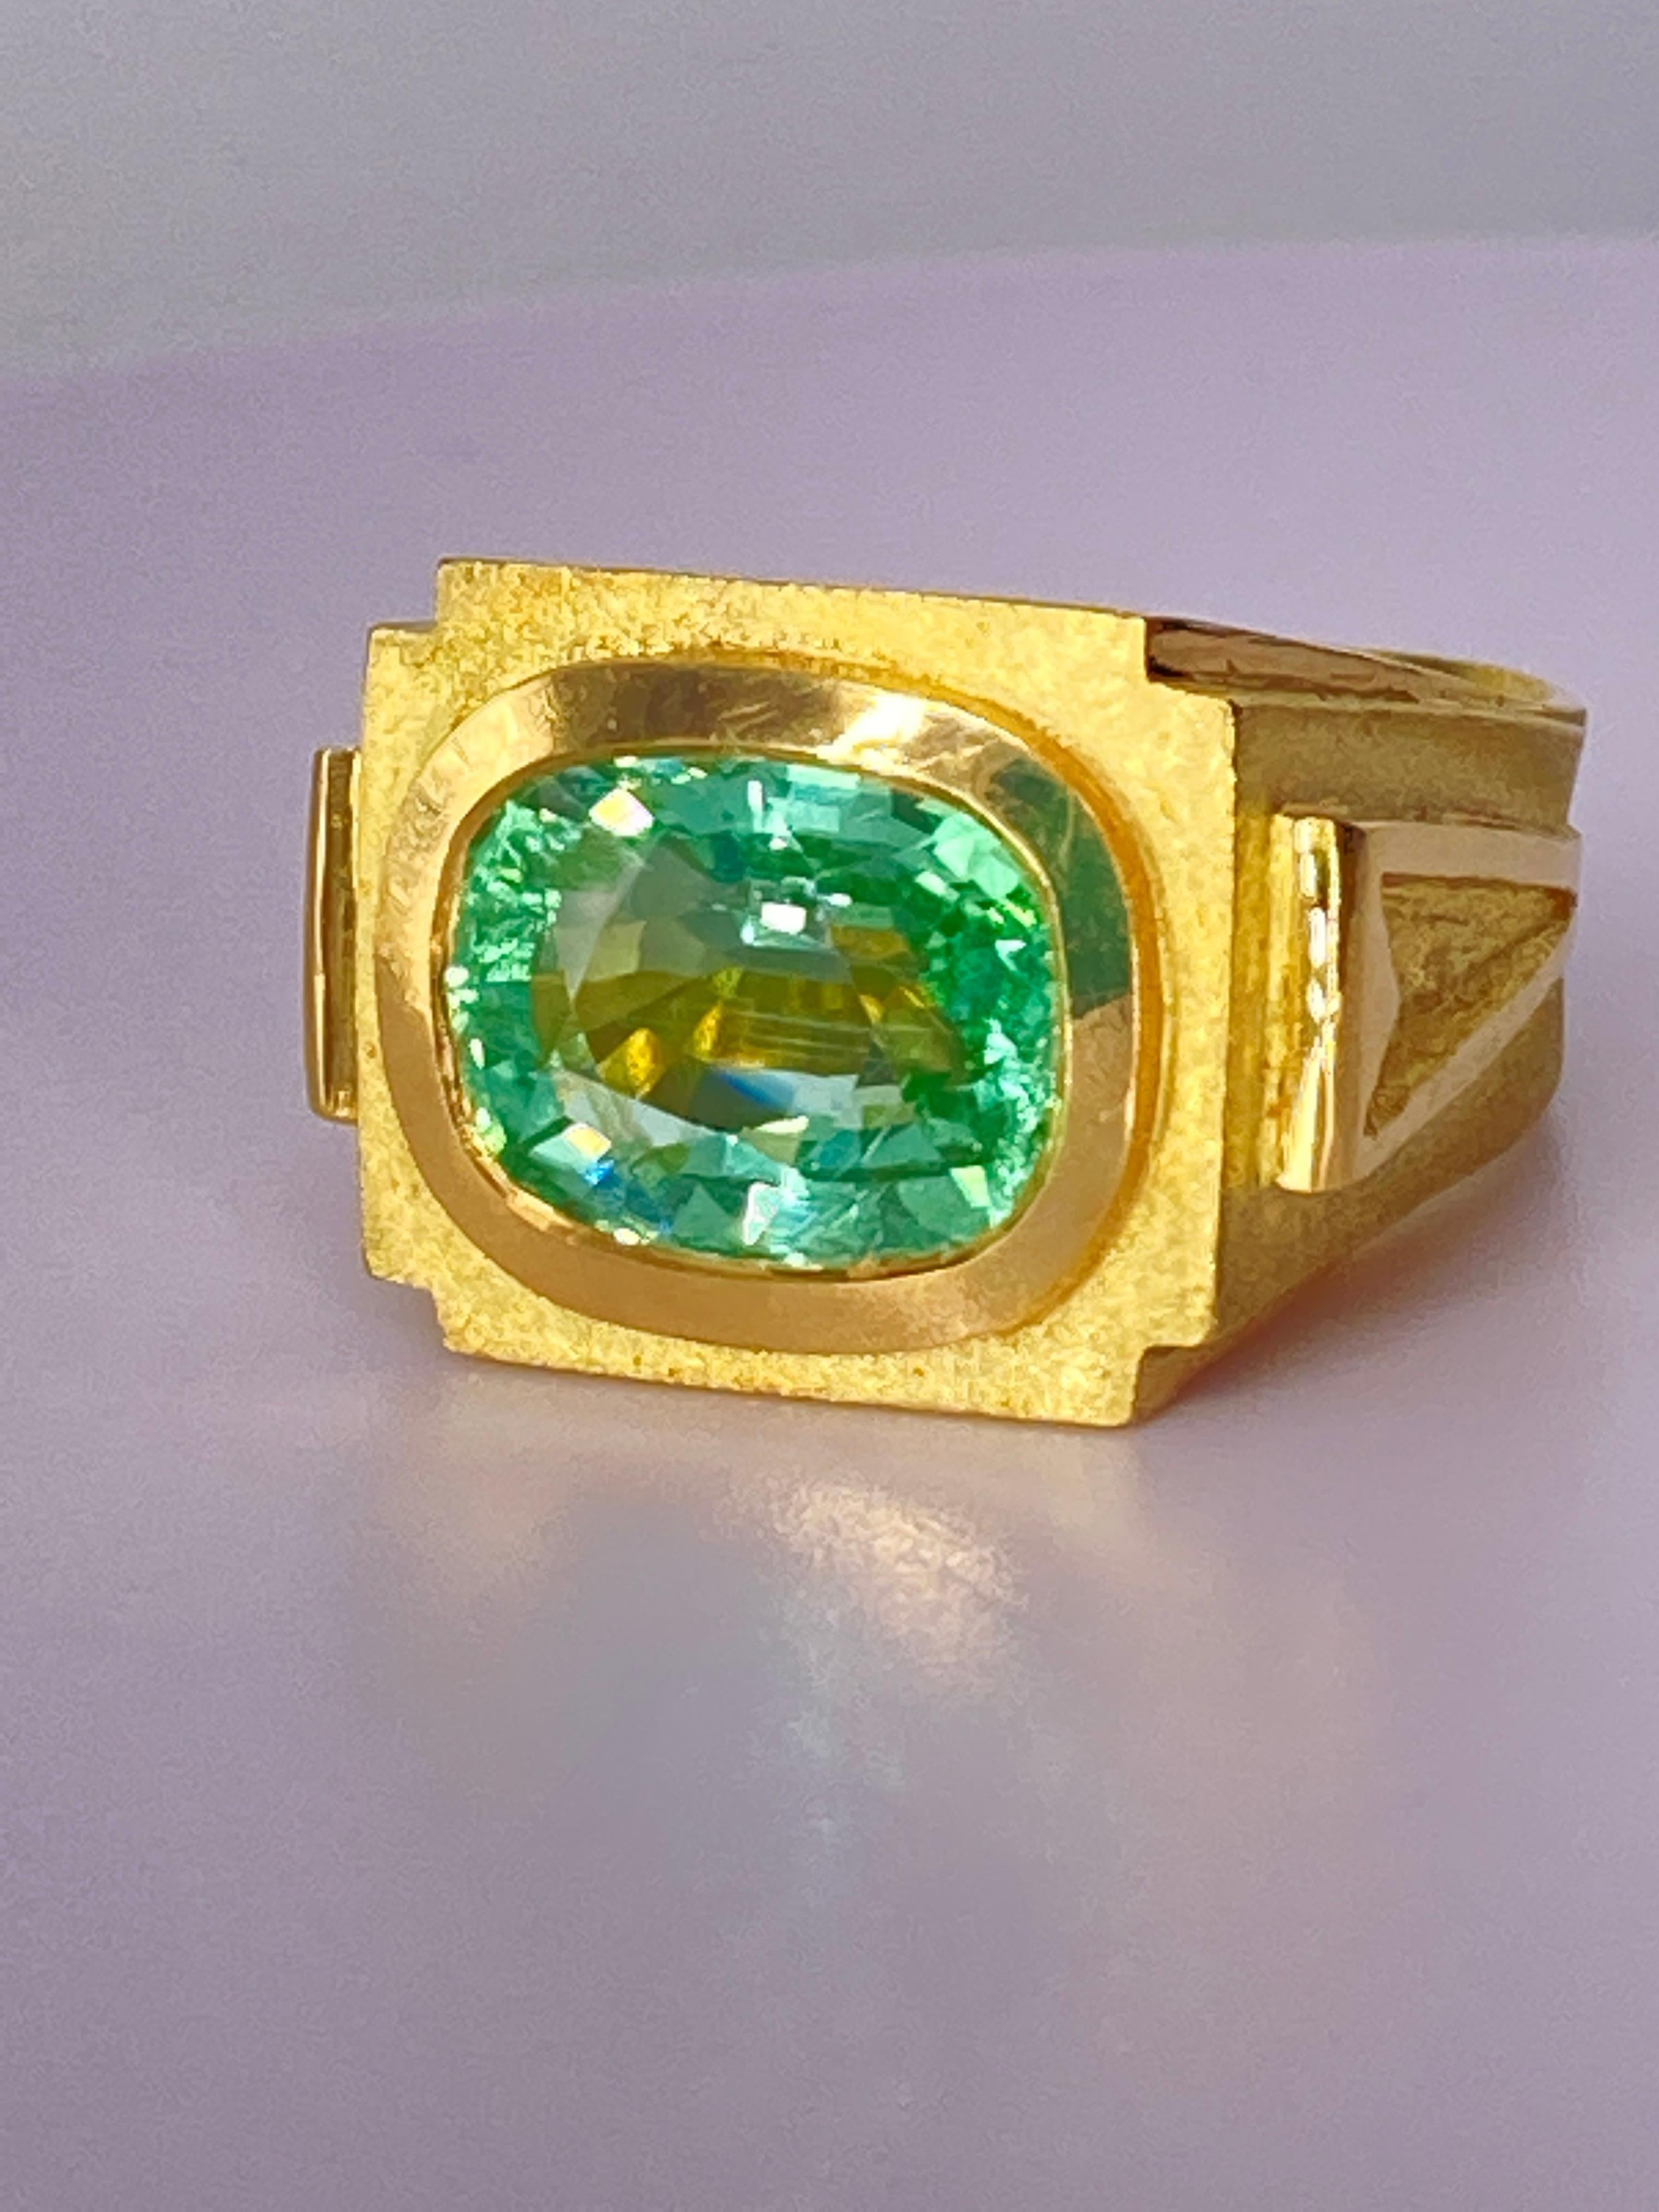 7 Carat Paraiba Tourmaline Ring 18 kt Yellow Gold In New Condition For Sale In Los Angeles, CA